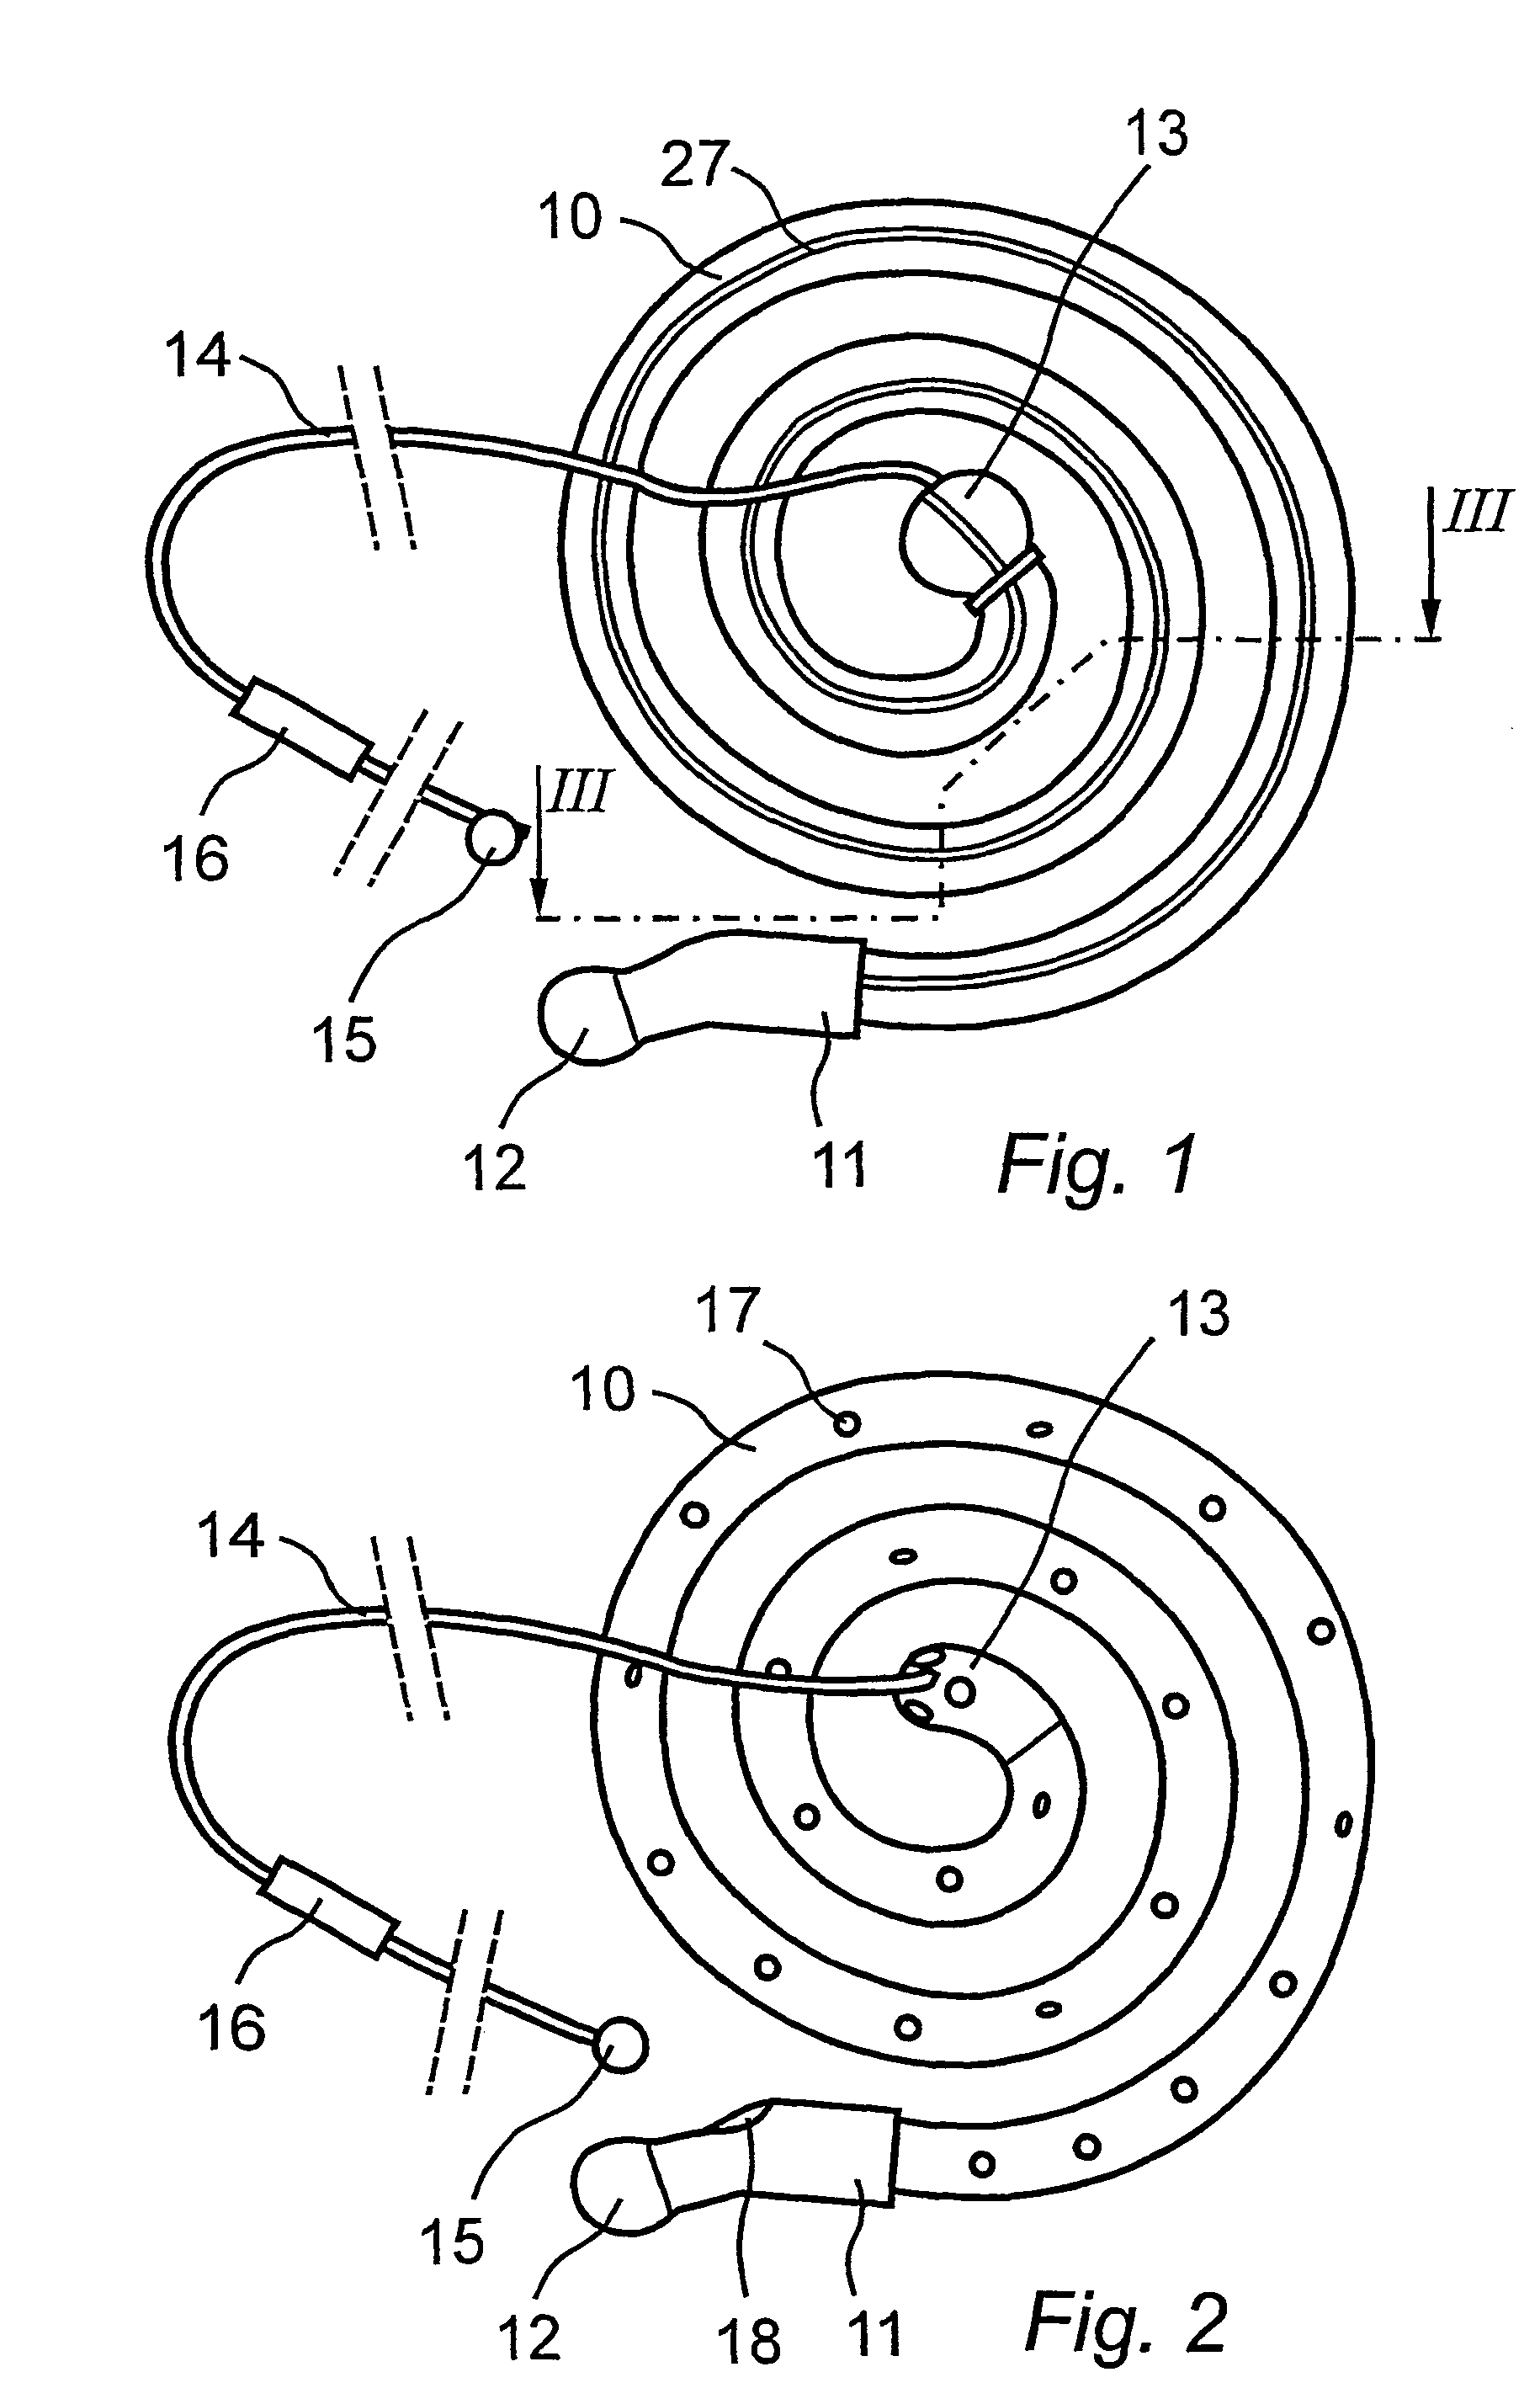 Method and apparatus for self-draining of urine